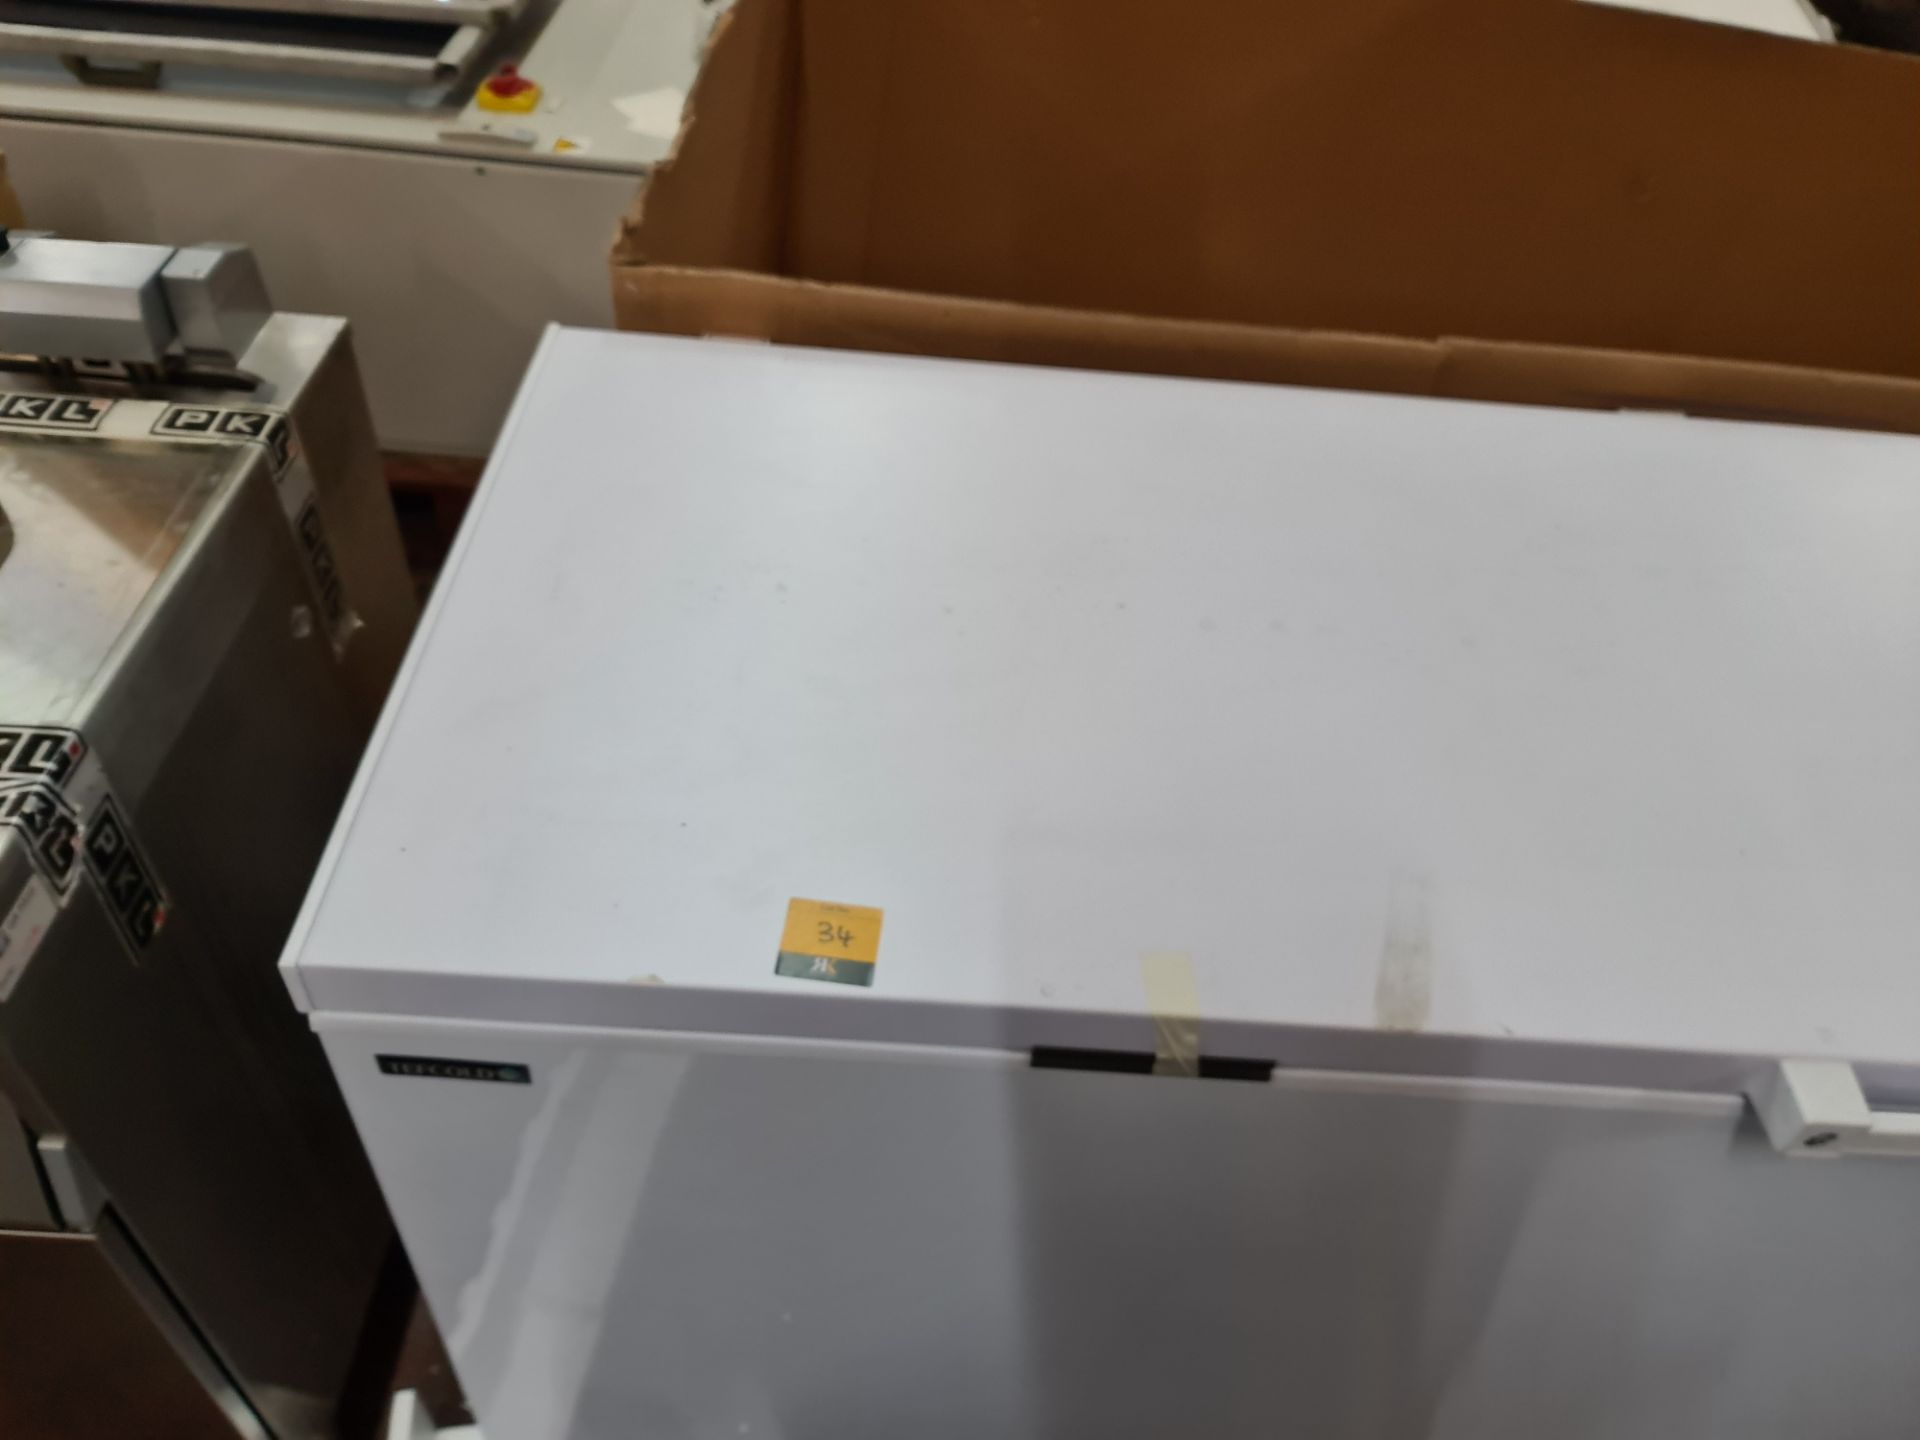 Tefcold 1.8 metre solid top chest freezer, model FR605SL, with 2 keys, appears new/unused. - Image 9 of 9